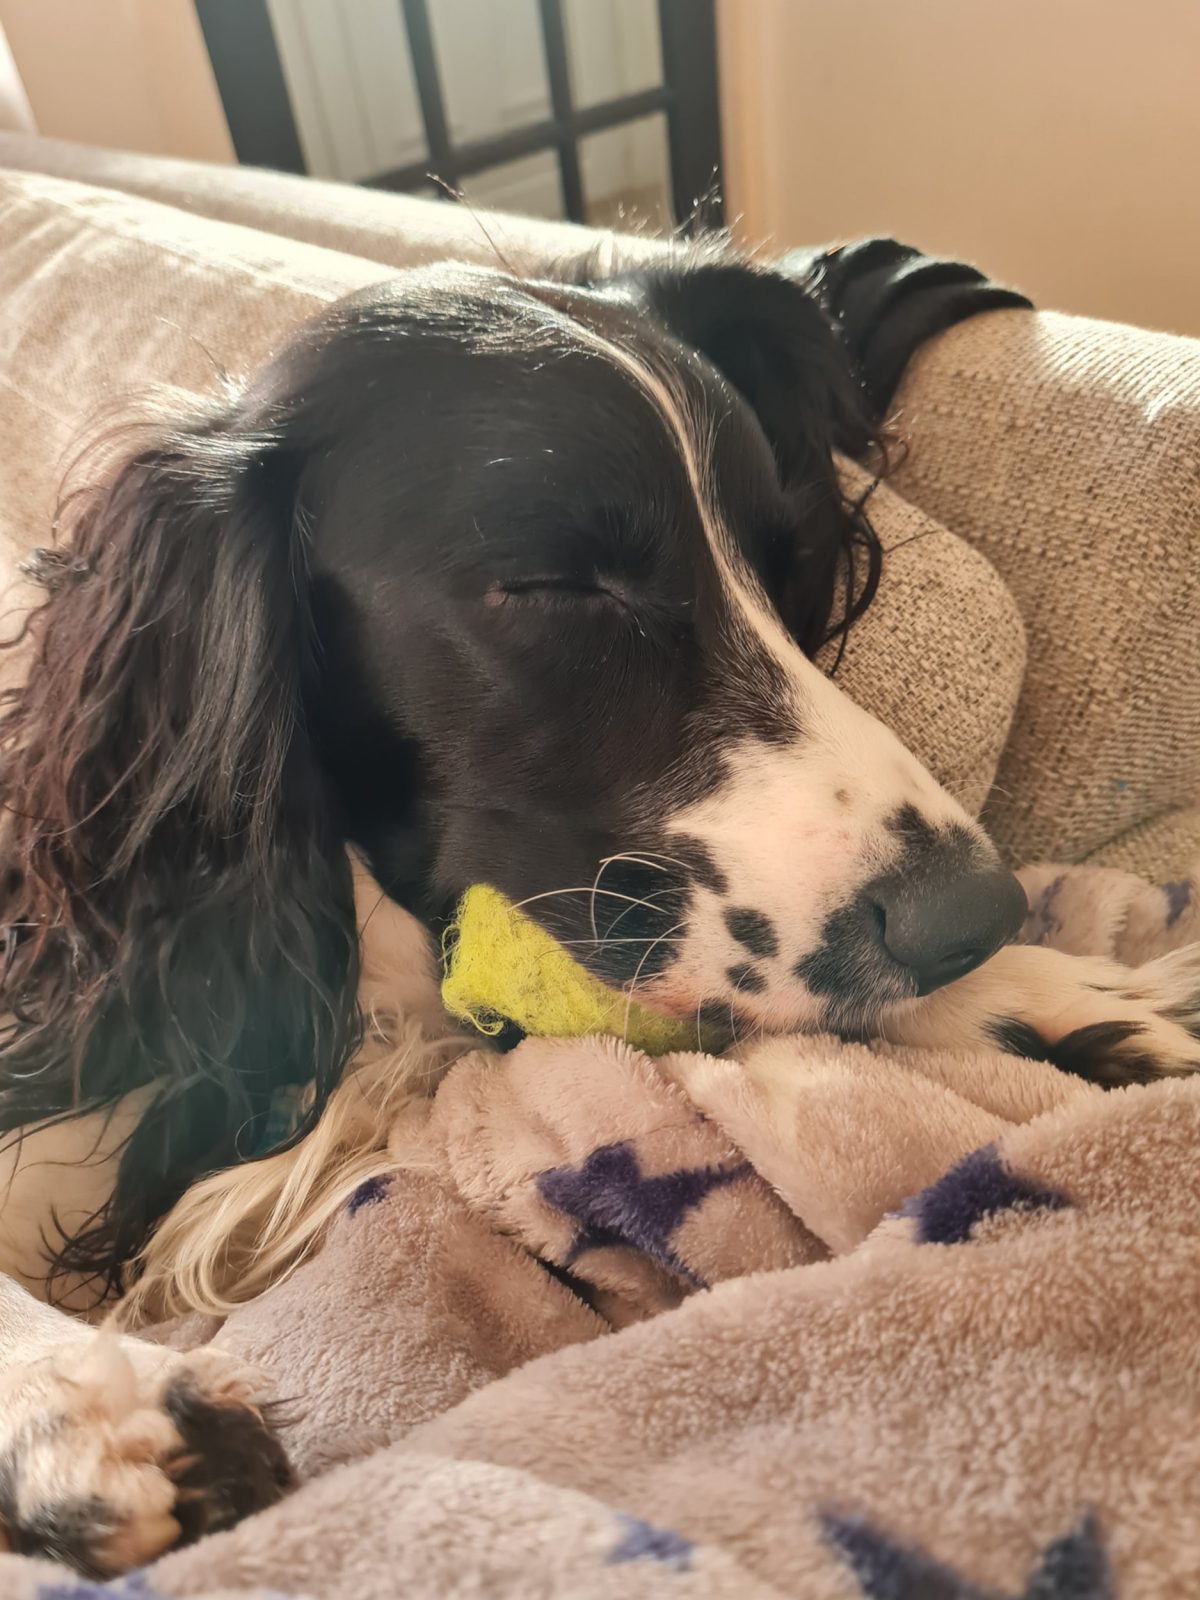 Griffin fast asleep with the tennis ball by his jaw